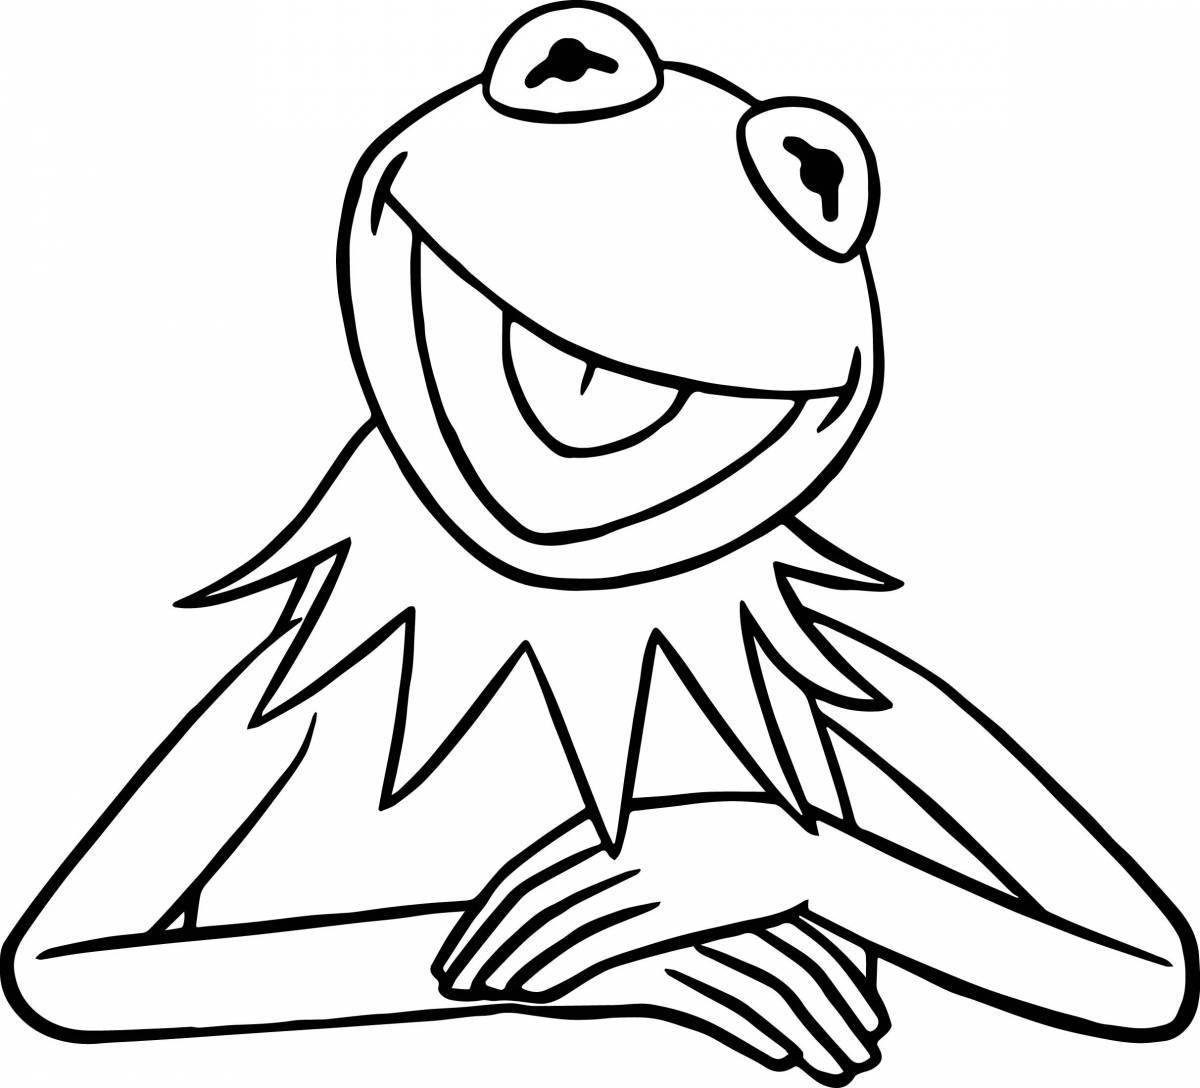 Coloring page of the funny frog meme